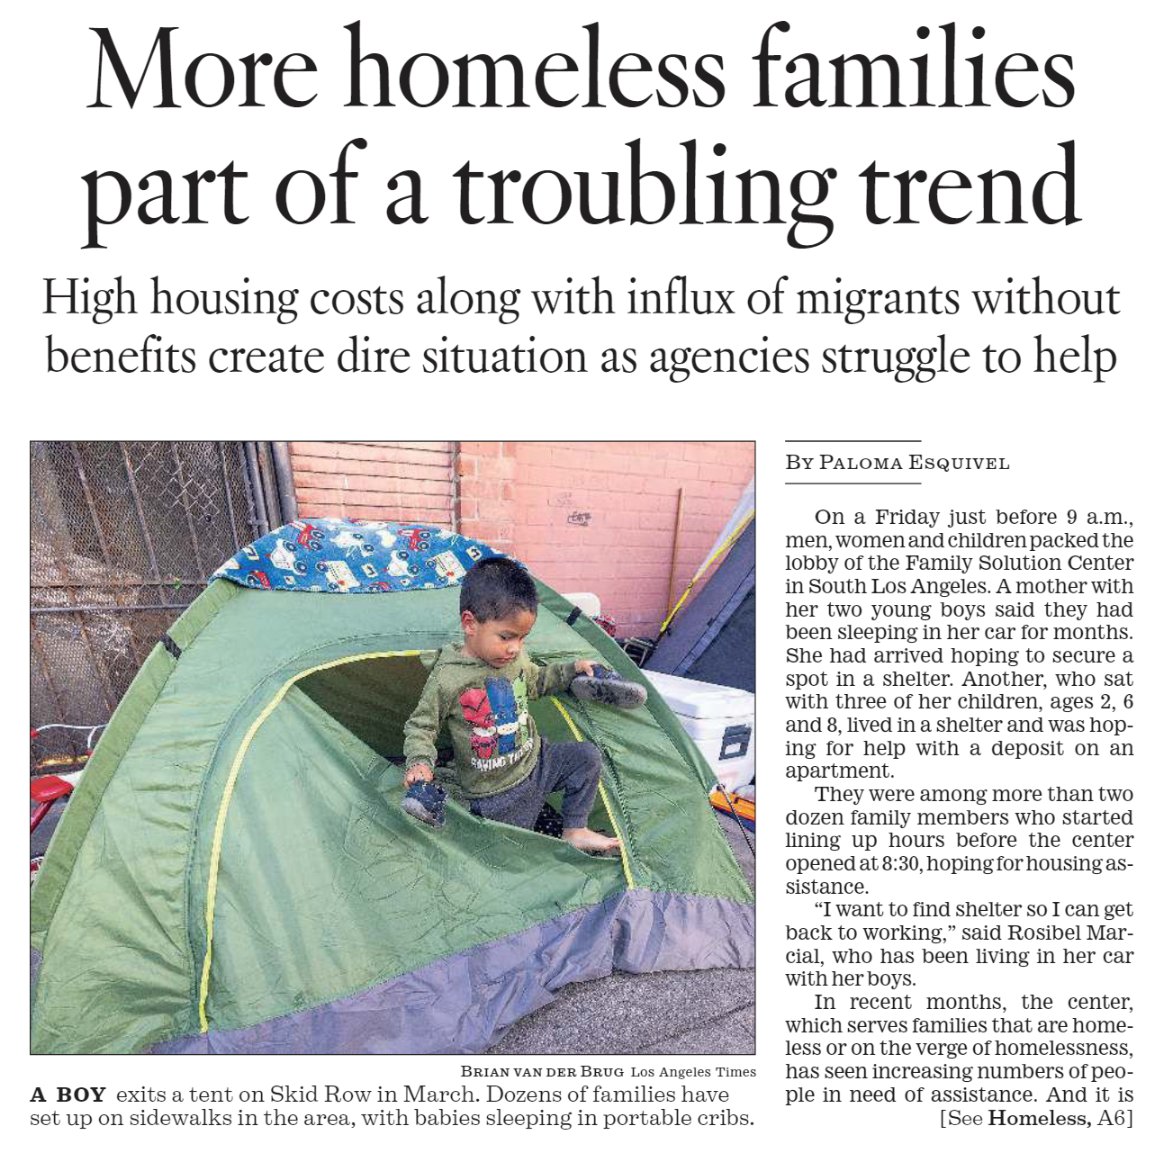 The front page of the LA Times this morning has a photo of a young boy living in a tent on Skid Row. Meanwhile, @CD5LosAngeles Councilwoman Katy Yaroslavsky is pushing an ordinance that would make housing for this young boy much harder to build.